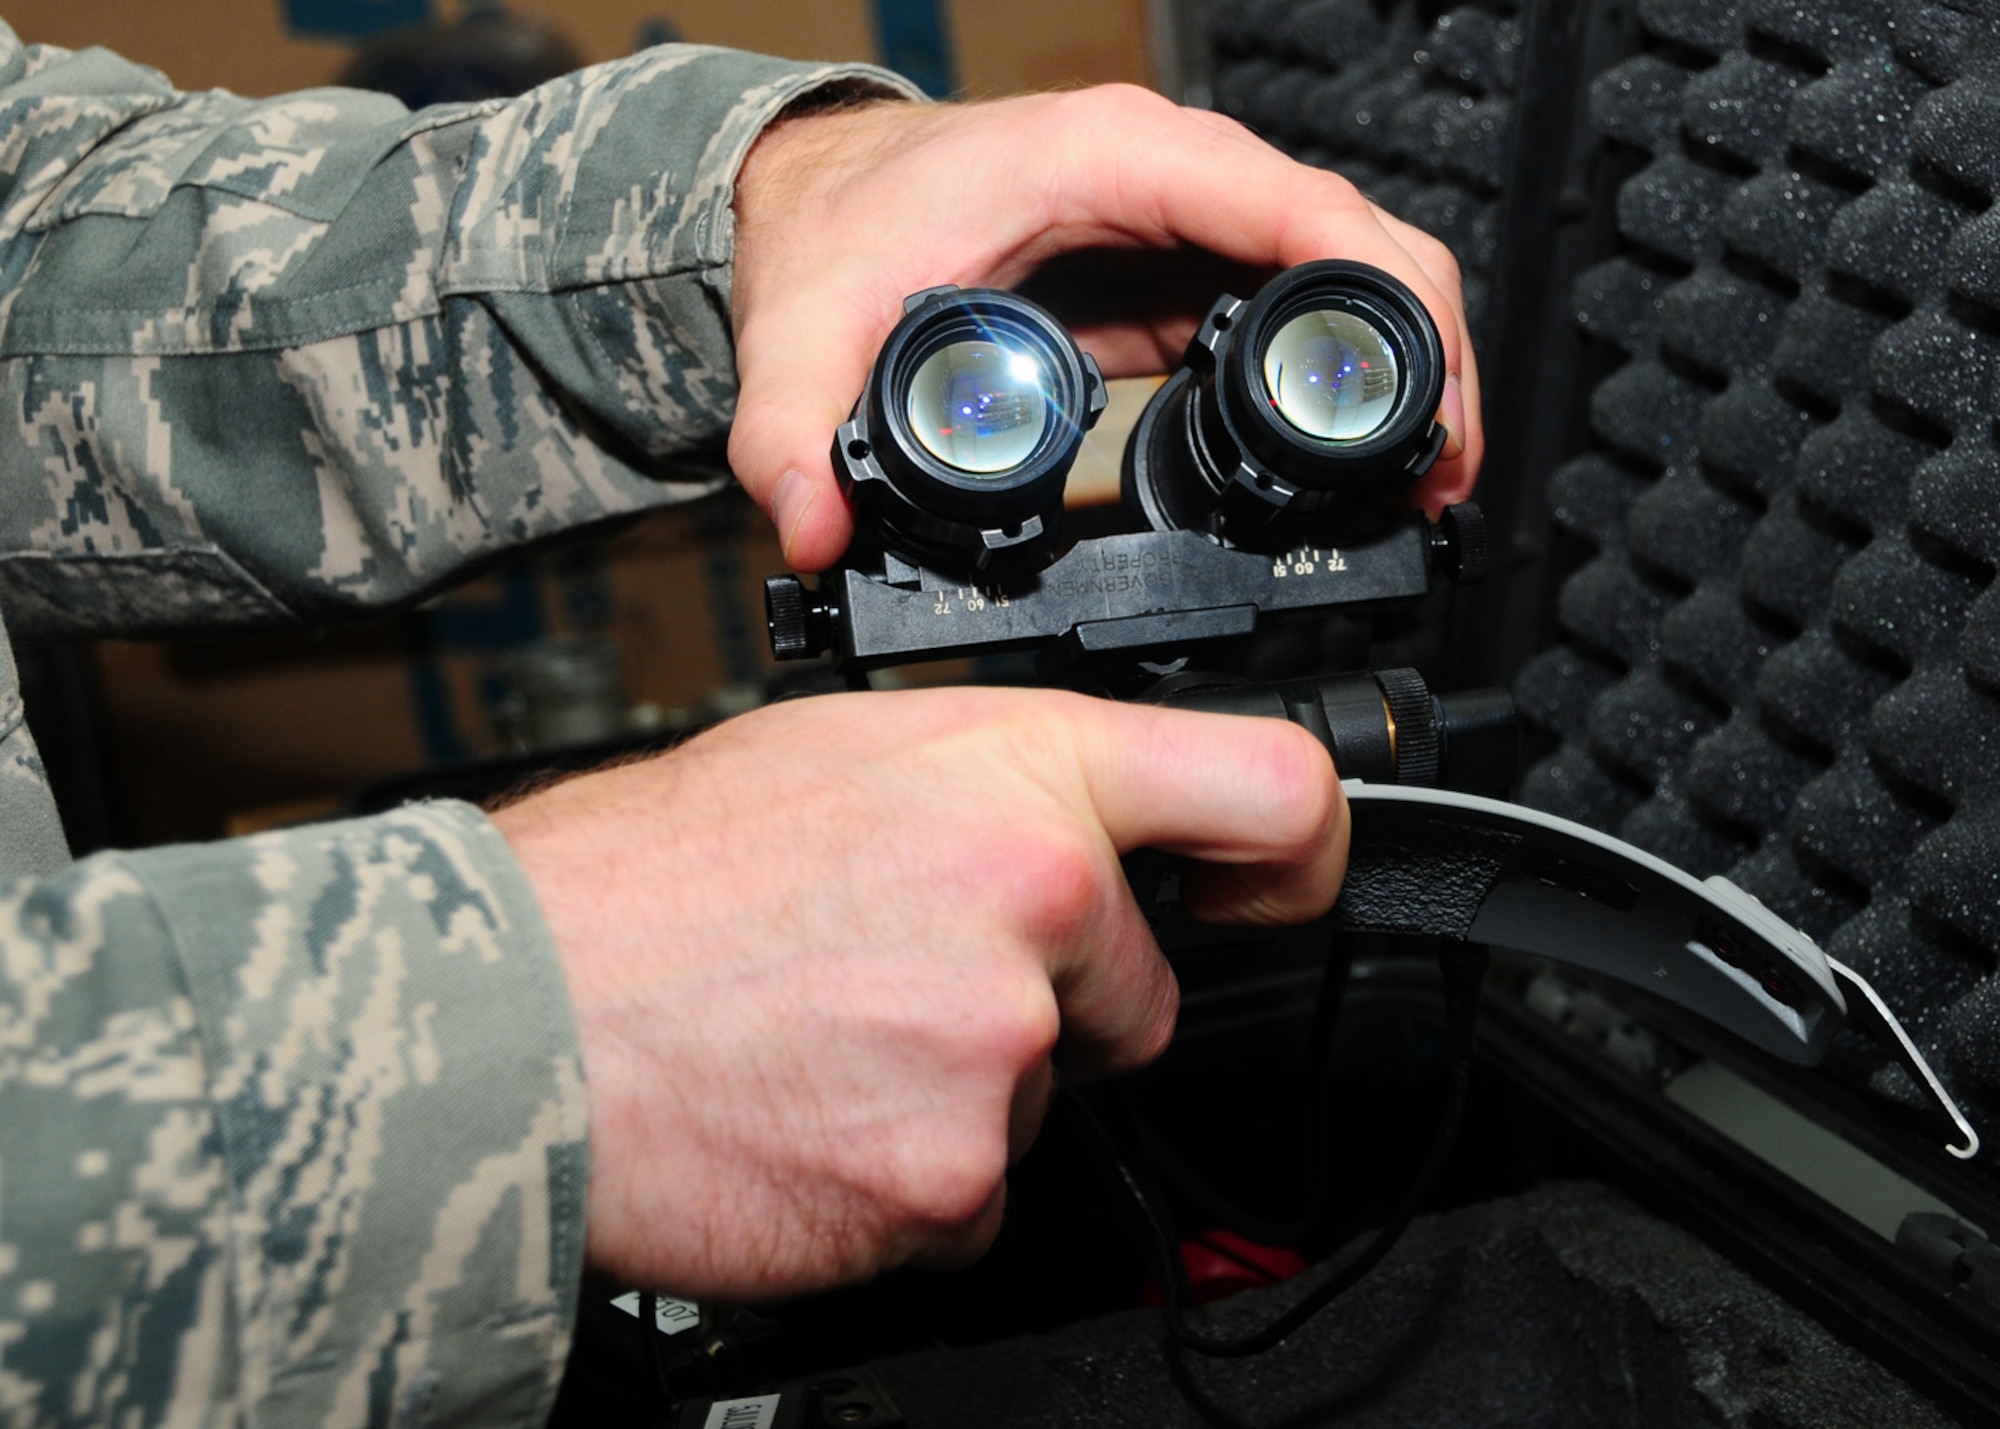 SOUTHWEST ASIA -- Tech. Sgt. Nathan Schasse, 817th Expeditionary Airlift Squadron, folds a pair of night vision goggles up and down to ensure they lock in both upper and lower positions at an air base in Southwest Asia, June 18. Along with checking the locking positions the goggles are also checked to make sure they release properly from the helmet mount. Sergeant Schasse is deployed from McChord Air Force Base, Wash., and is originally from Madison, Wis. (U.S. Air Force photo/Senior Airman Courtney Richardson)